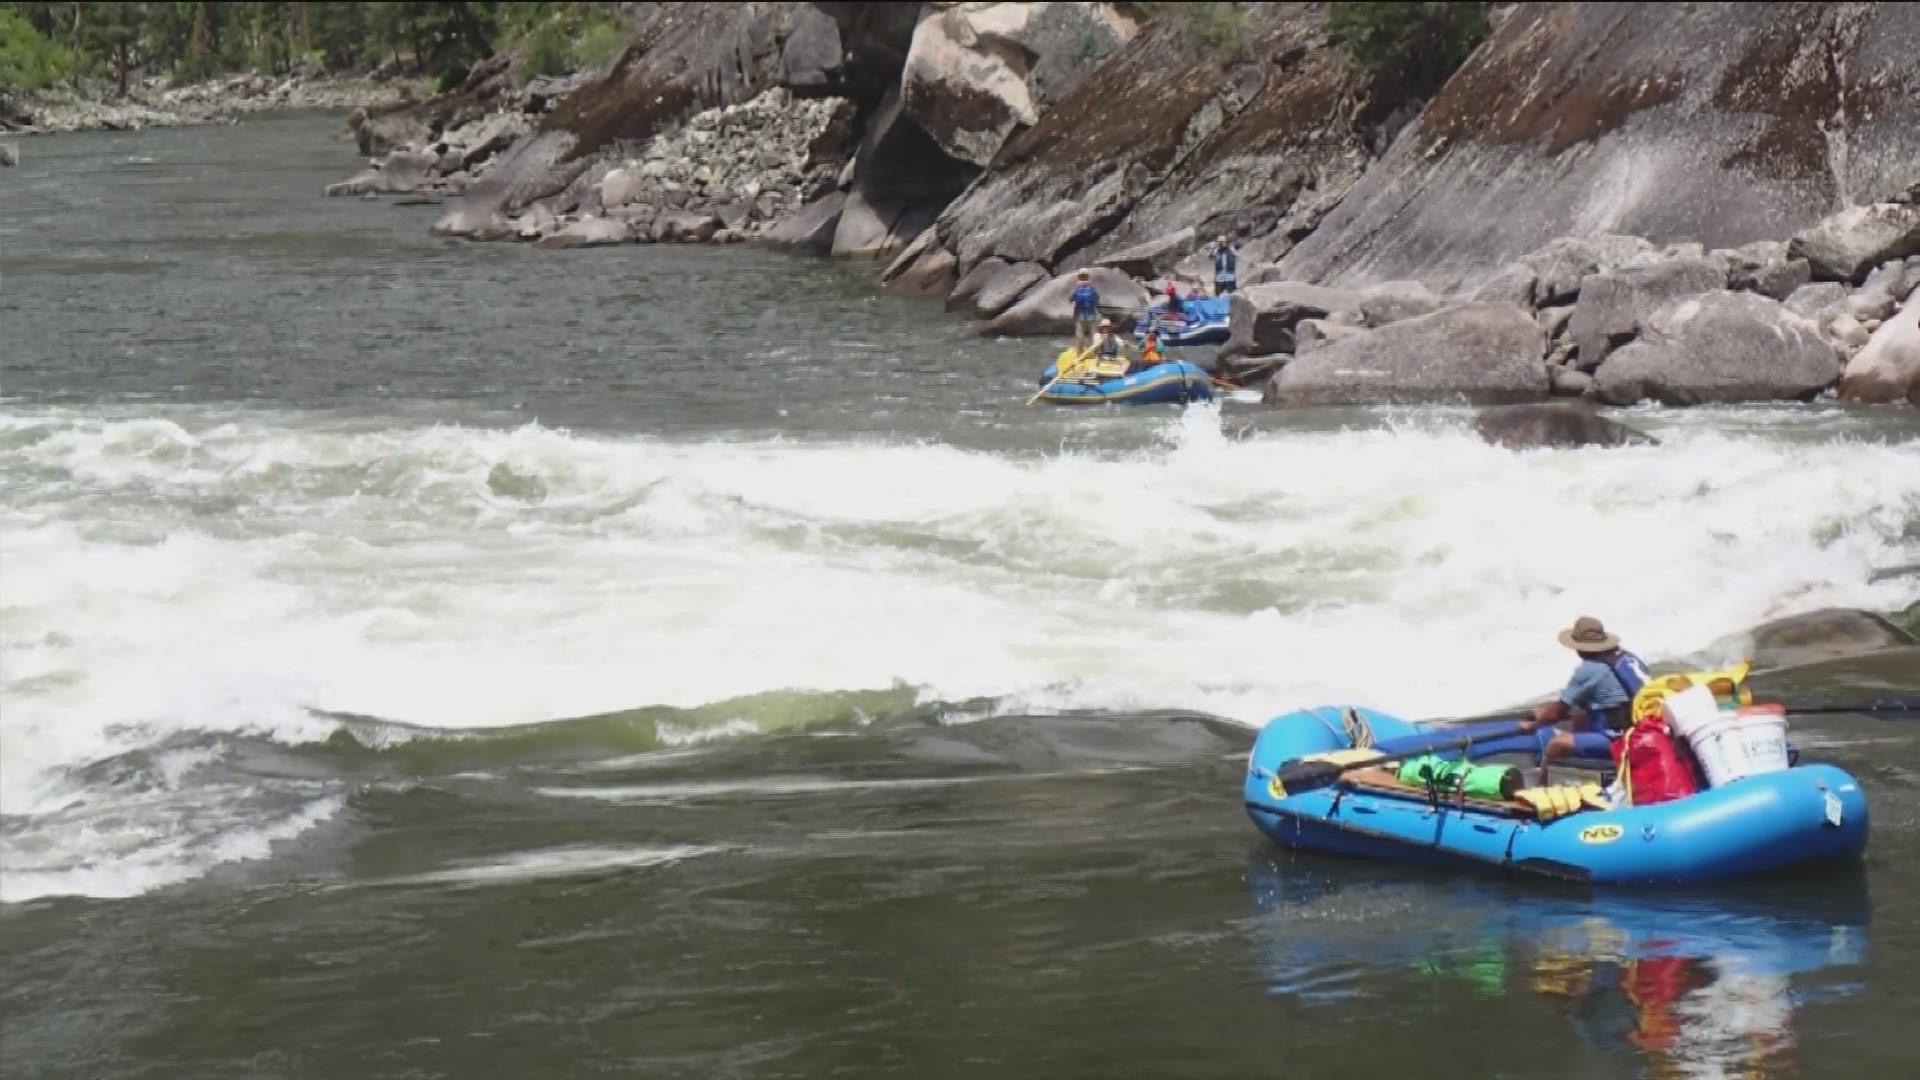 The company will provide bus or vehicle shuttles to the Middle Fork and Salmon River for rafting season this year.